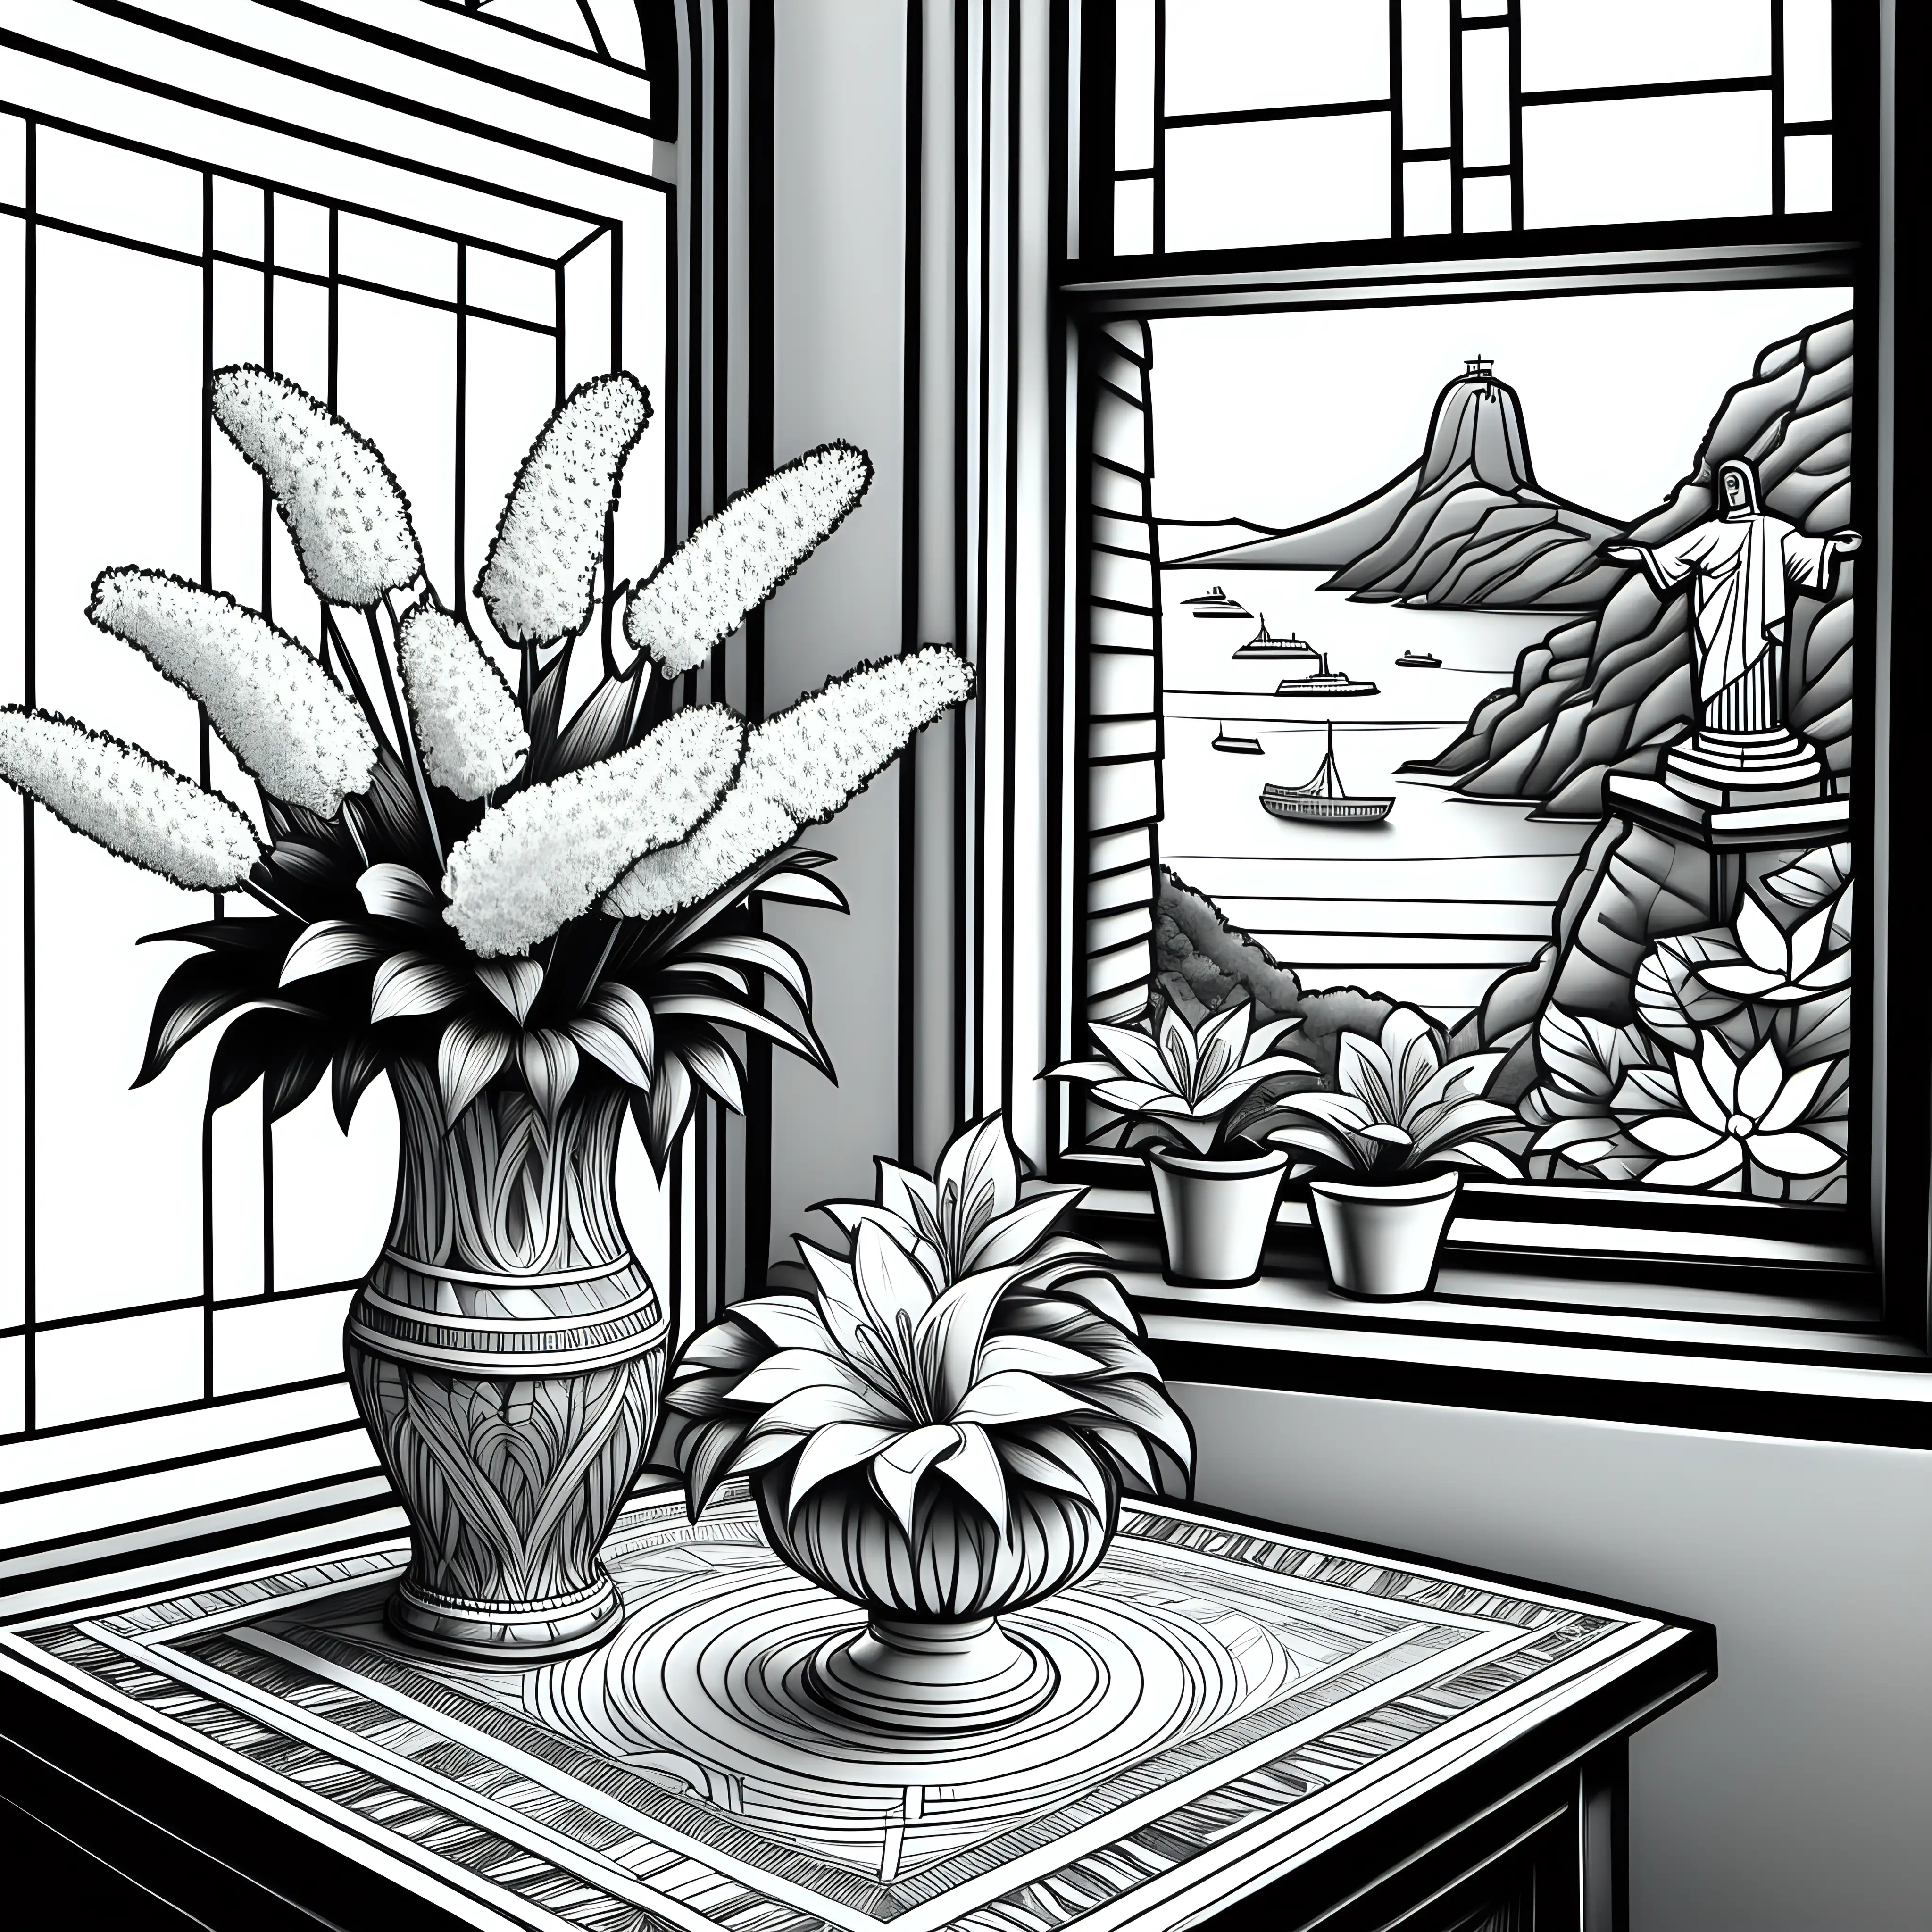 black and white, adult coloring book style drawing, highly detailed, focus on flower arrangements with native brazilian flowers in a typical brazilian vase sitting on a table in front of a corner window, window scene includes a small detailed scene including Christ the Redeemer statue in the distance 